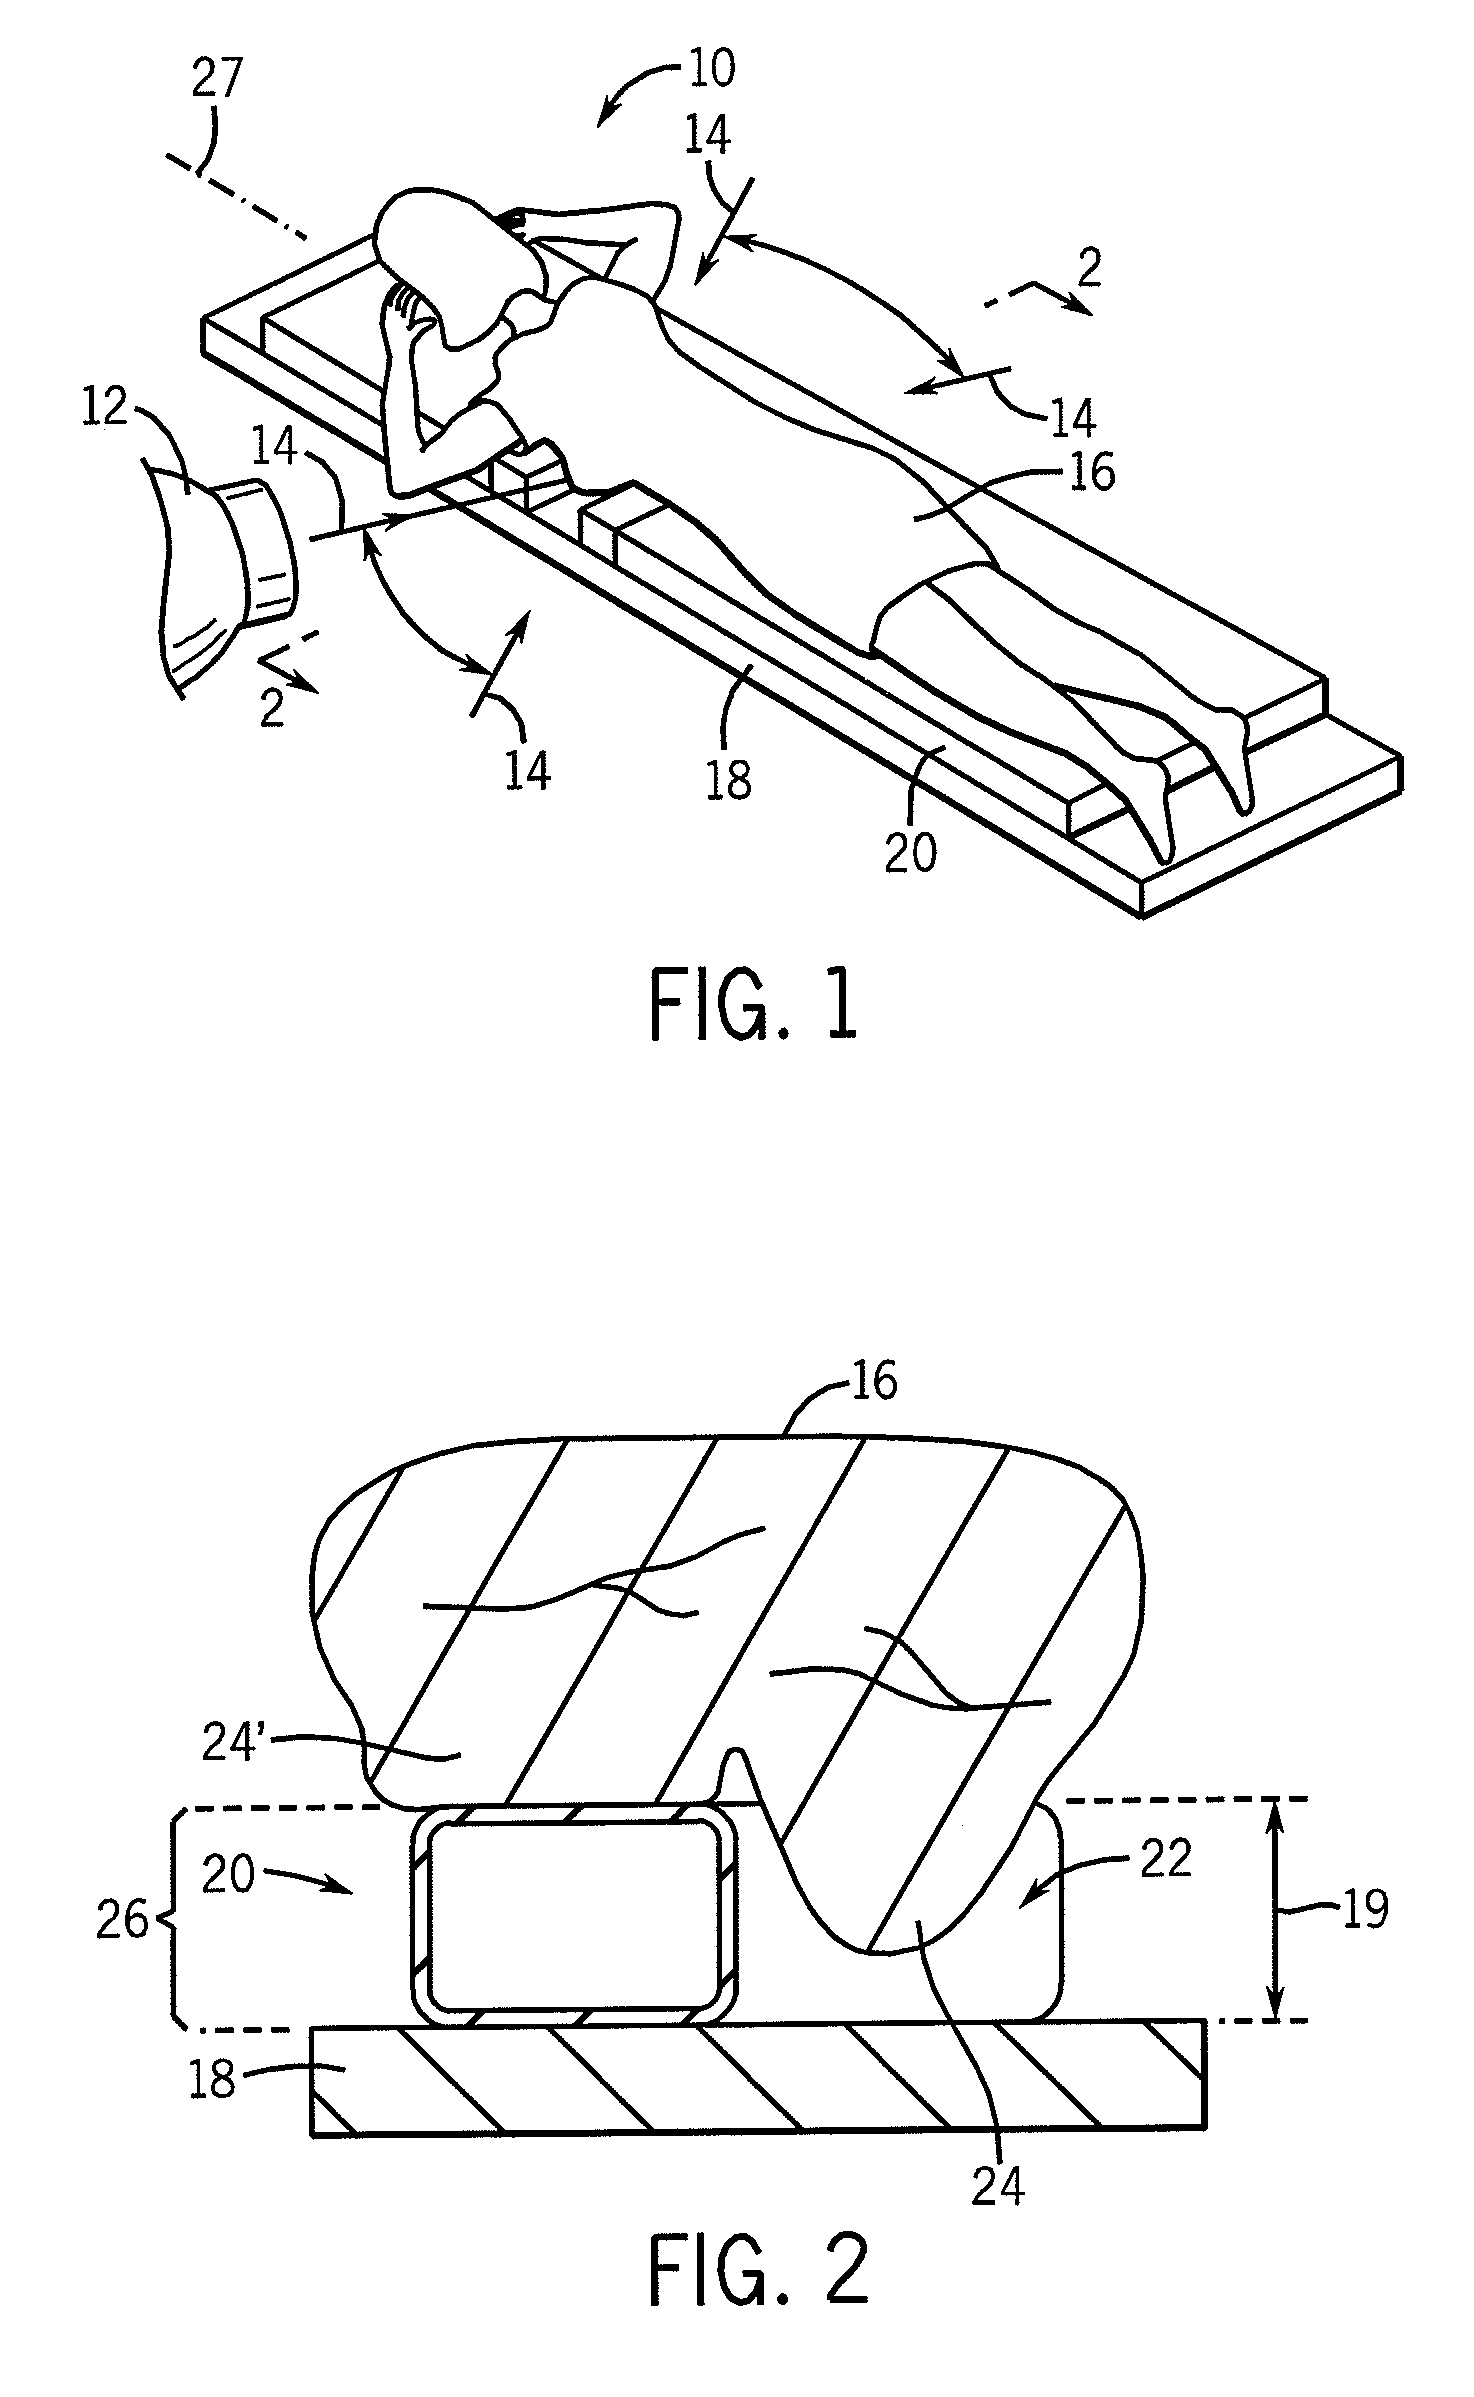 Low skin dose patient positioning device for radiation treatment of prone breast